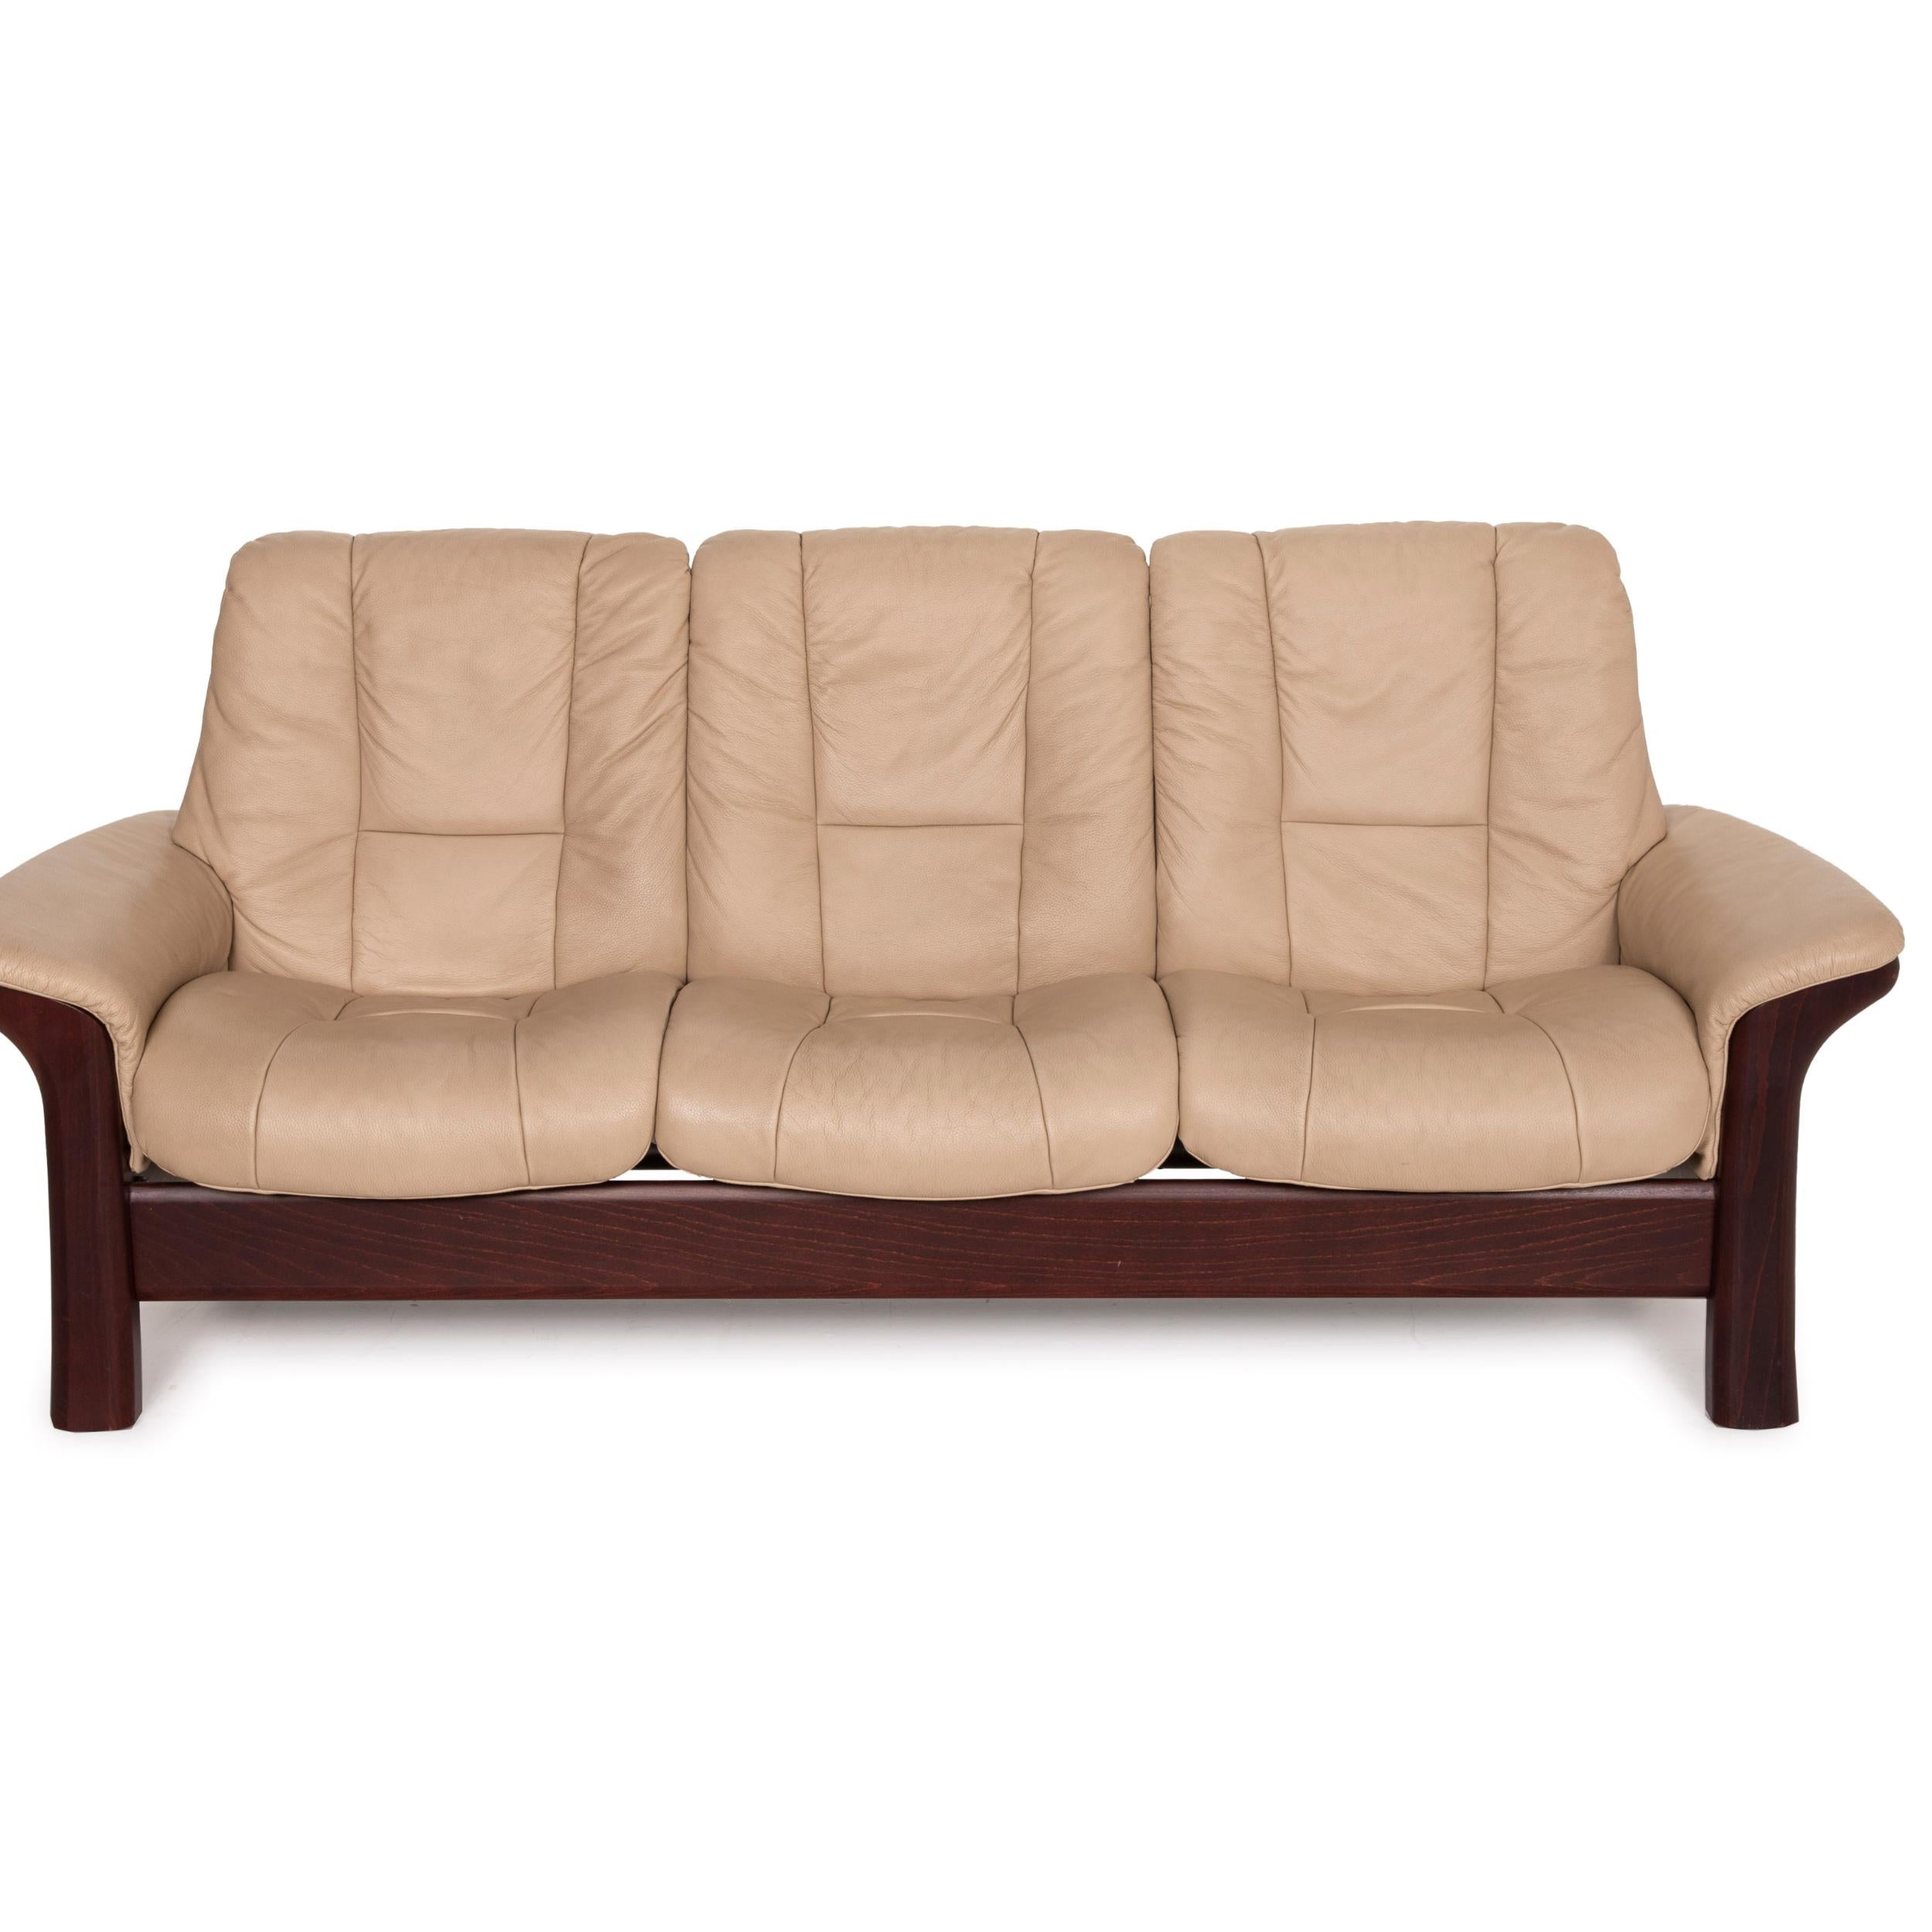 Contemporary Stressless Windsor Leather Sofa Beige Three-Seater Relax Function